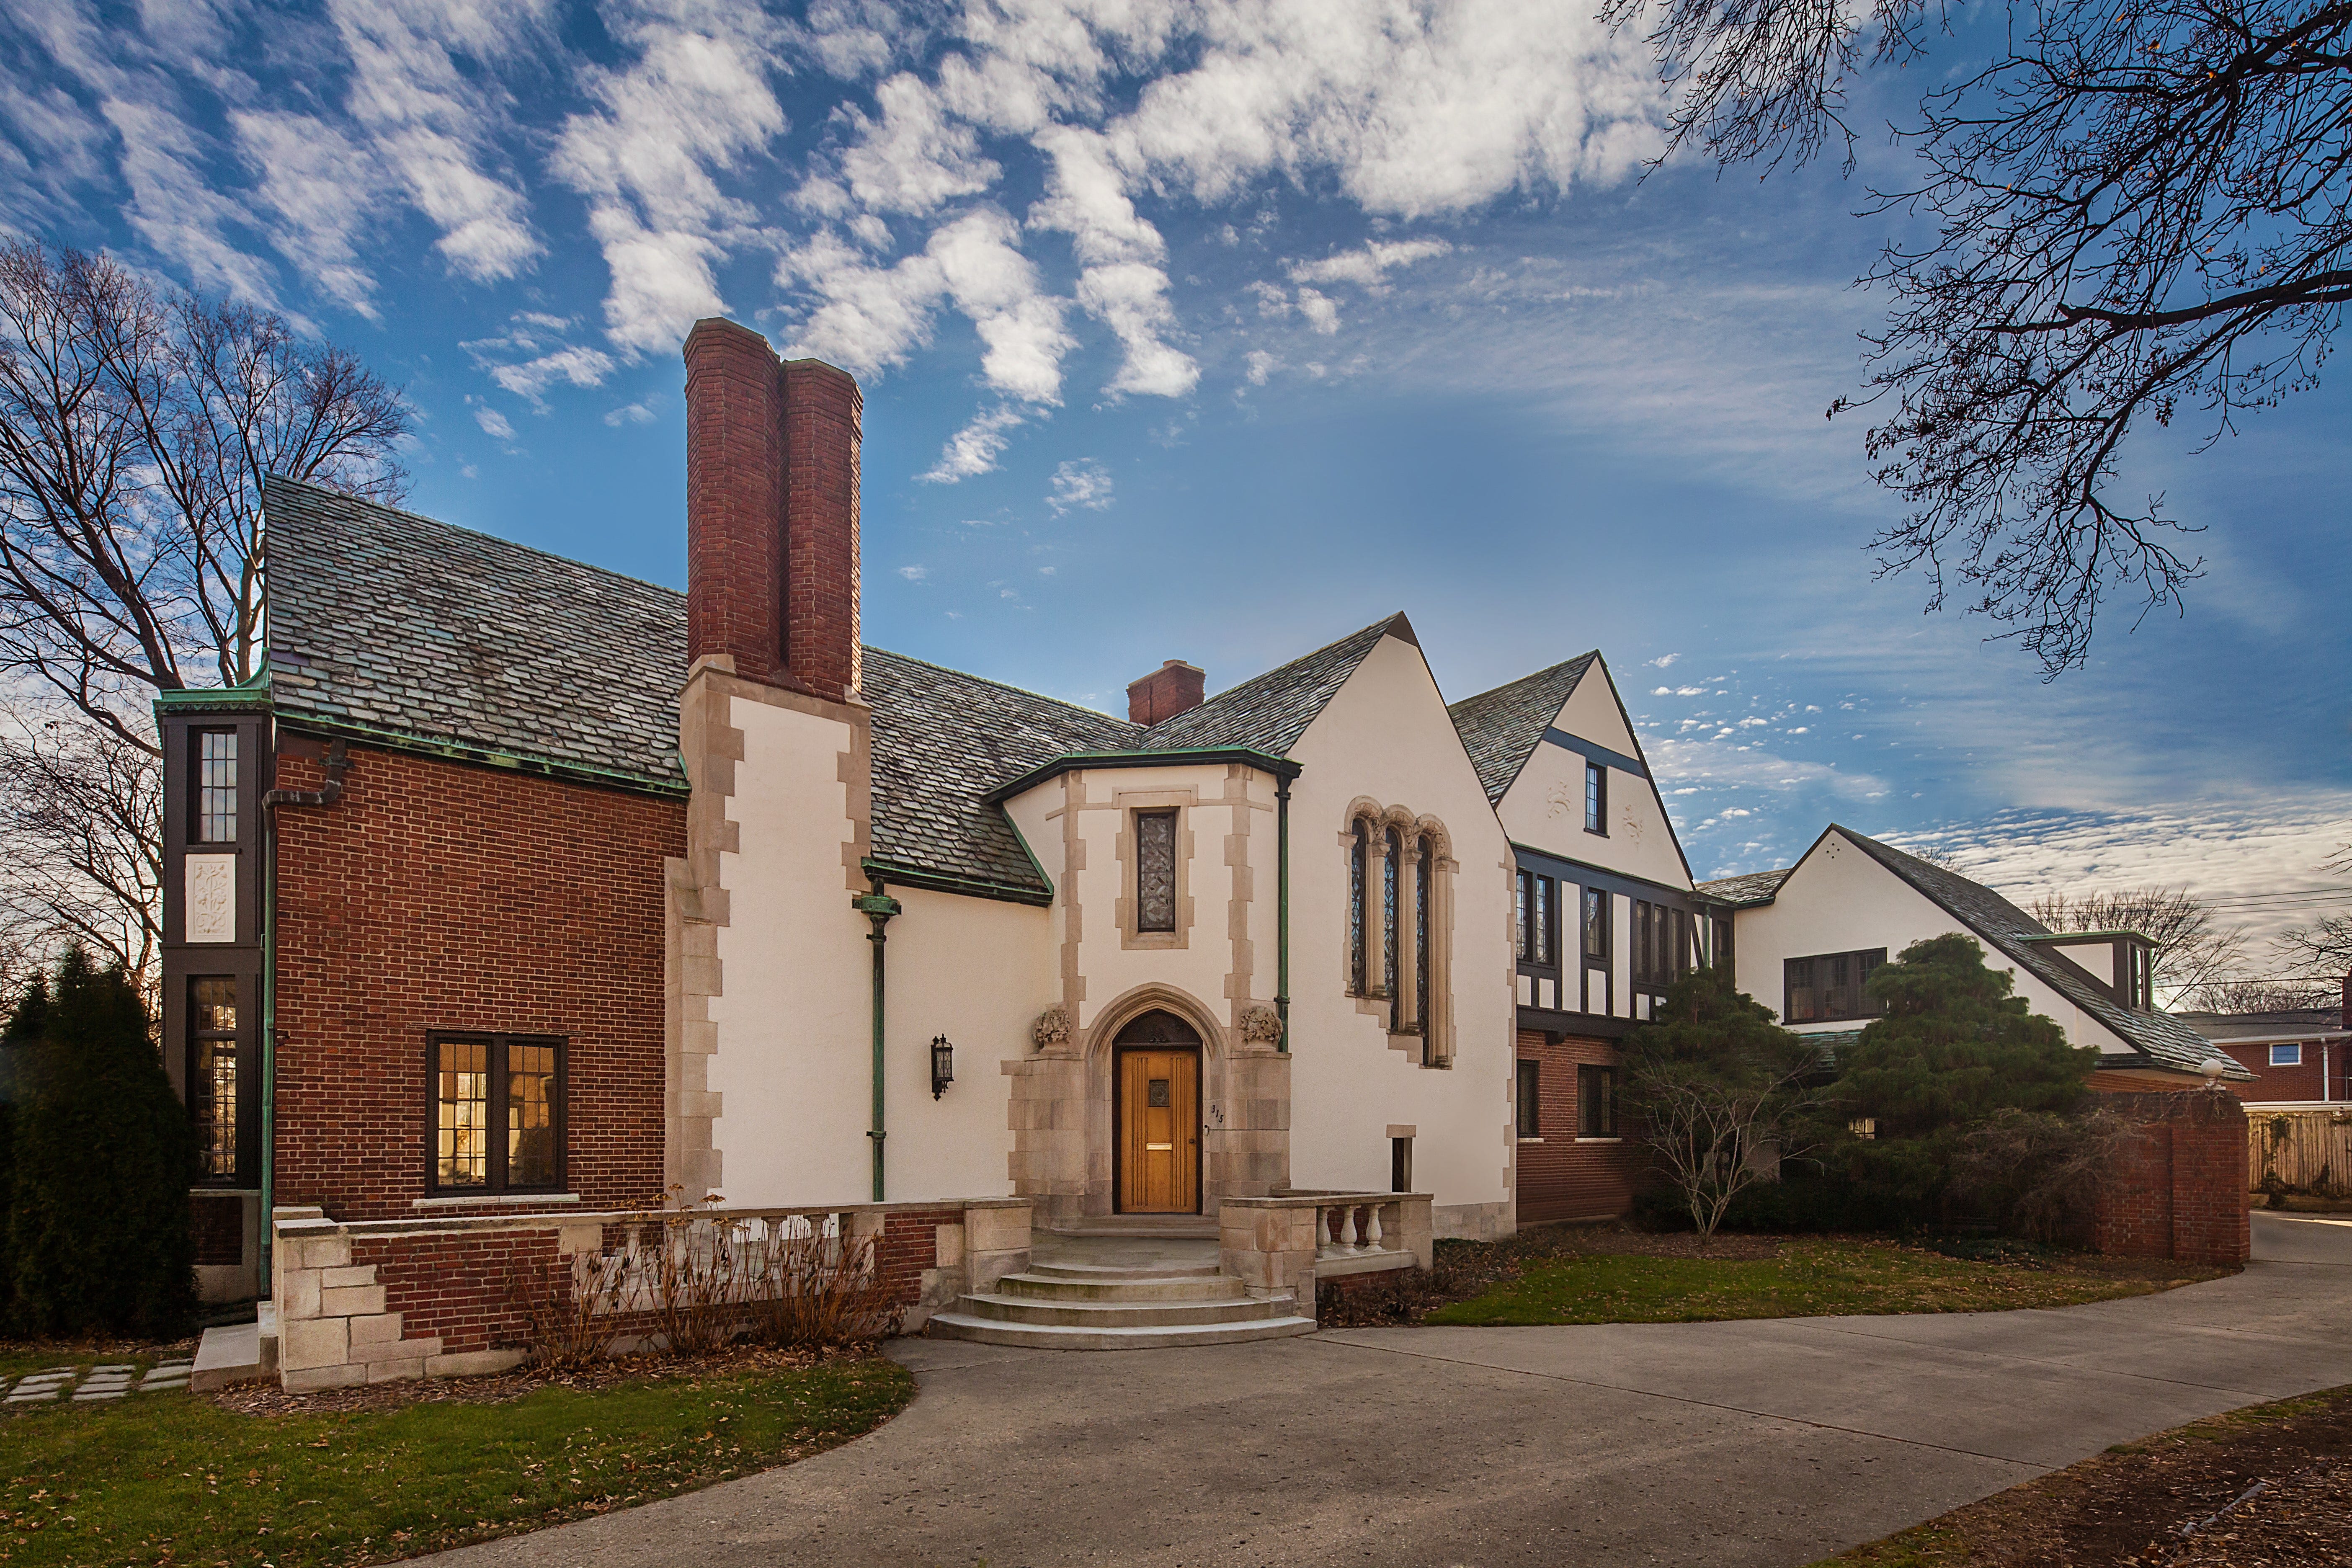 More than 20 local interior designers have spent weeks transforming an 8,500—square-foot Tudor at 315 Lakeland in Grosse Pointe into the Junior League of Detroit’s latest – and last – Designers’ Show House.